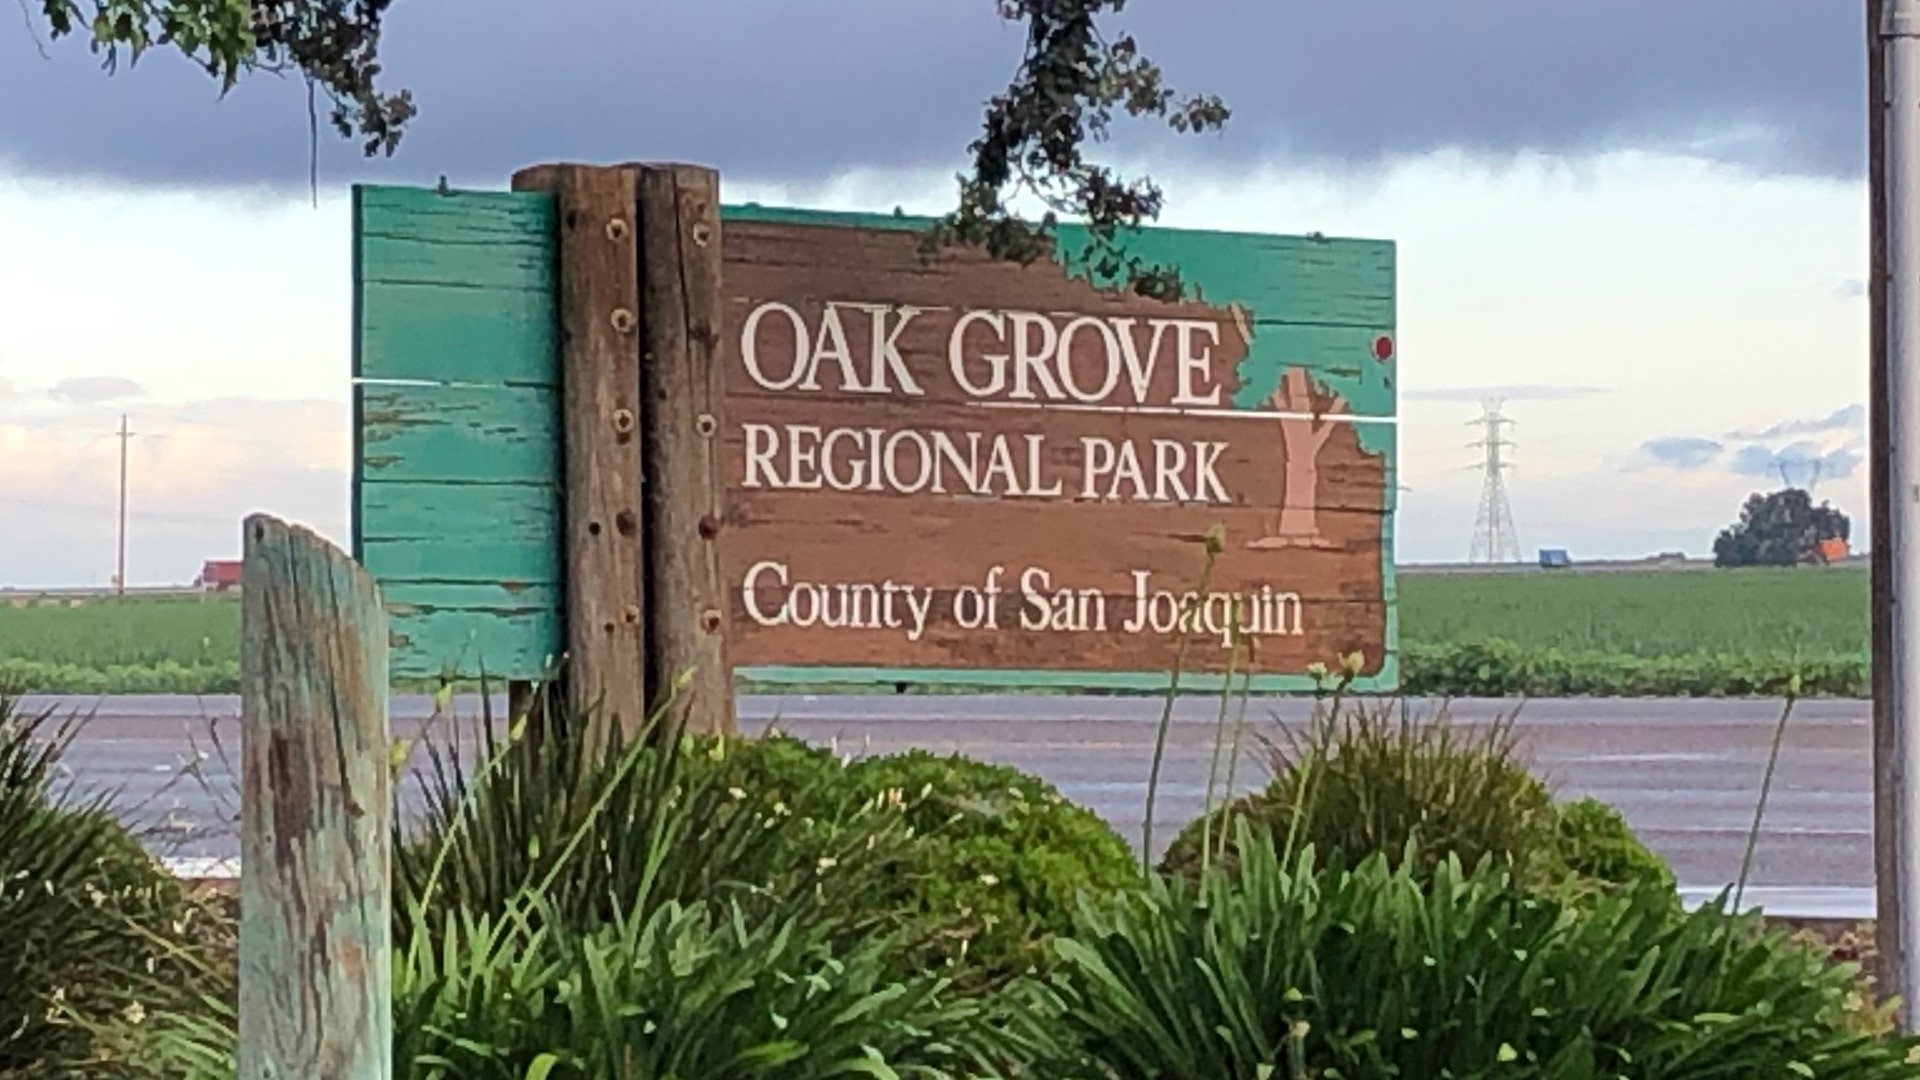 Select community parks in San Joaquin County set to reopen